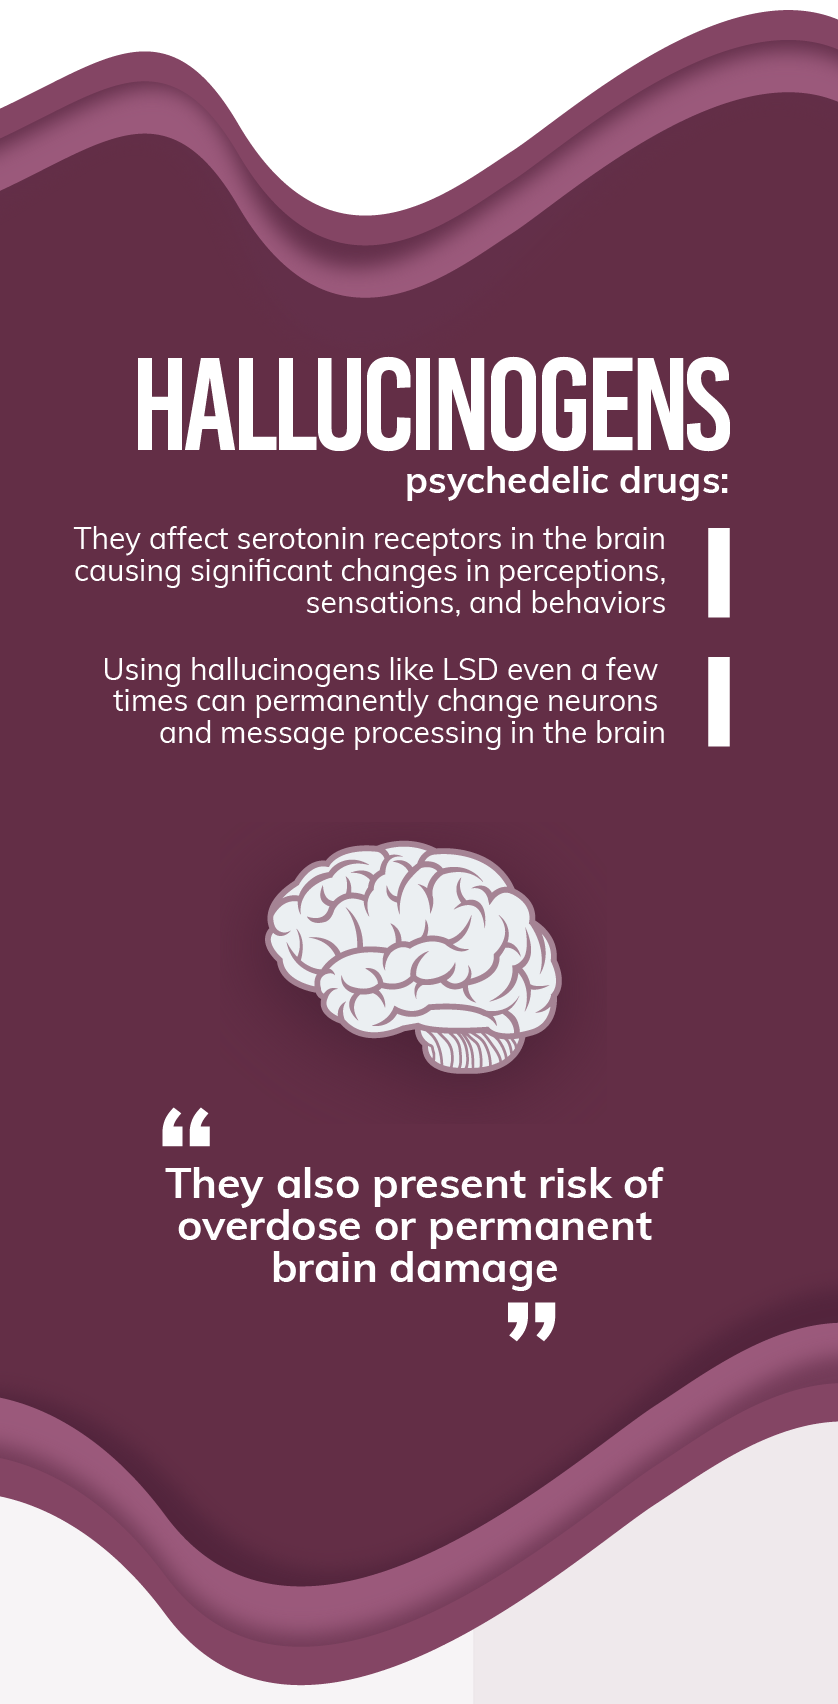 The short term effects of the drugs on the body are, heightened risk of stroke or heart attack, panic attacks, severe drowsiness or wakefulness, changes to heart rate abd blood pressure, escalation of harmful behaviors and dangerous sexual practices, unhealthy changes in appetite and overdose or death.The long tern effects of the drugs on the body are, impairment or disease in the liver and kidneys, hormonal changes, lung or heart disease, cancer, HIV, hepatitis and other transferable diseases and neurological changes.